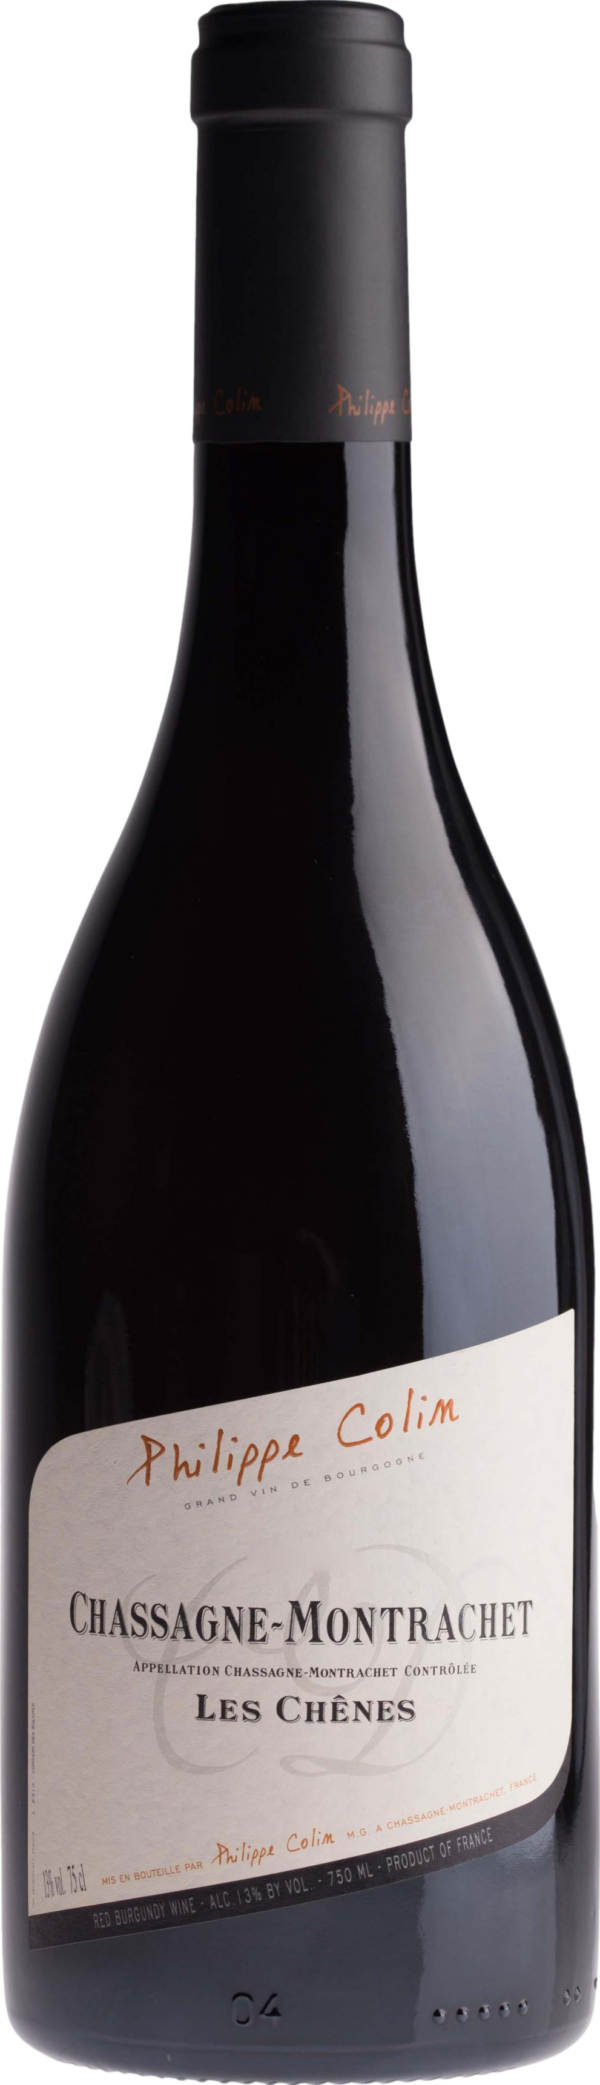 Product image of Philippe Colin Chassagne Montrachet  Les Chenes Rouge 2020 from 8wines